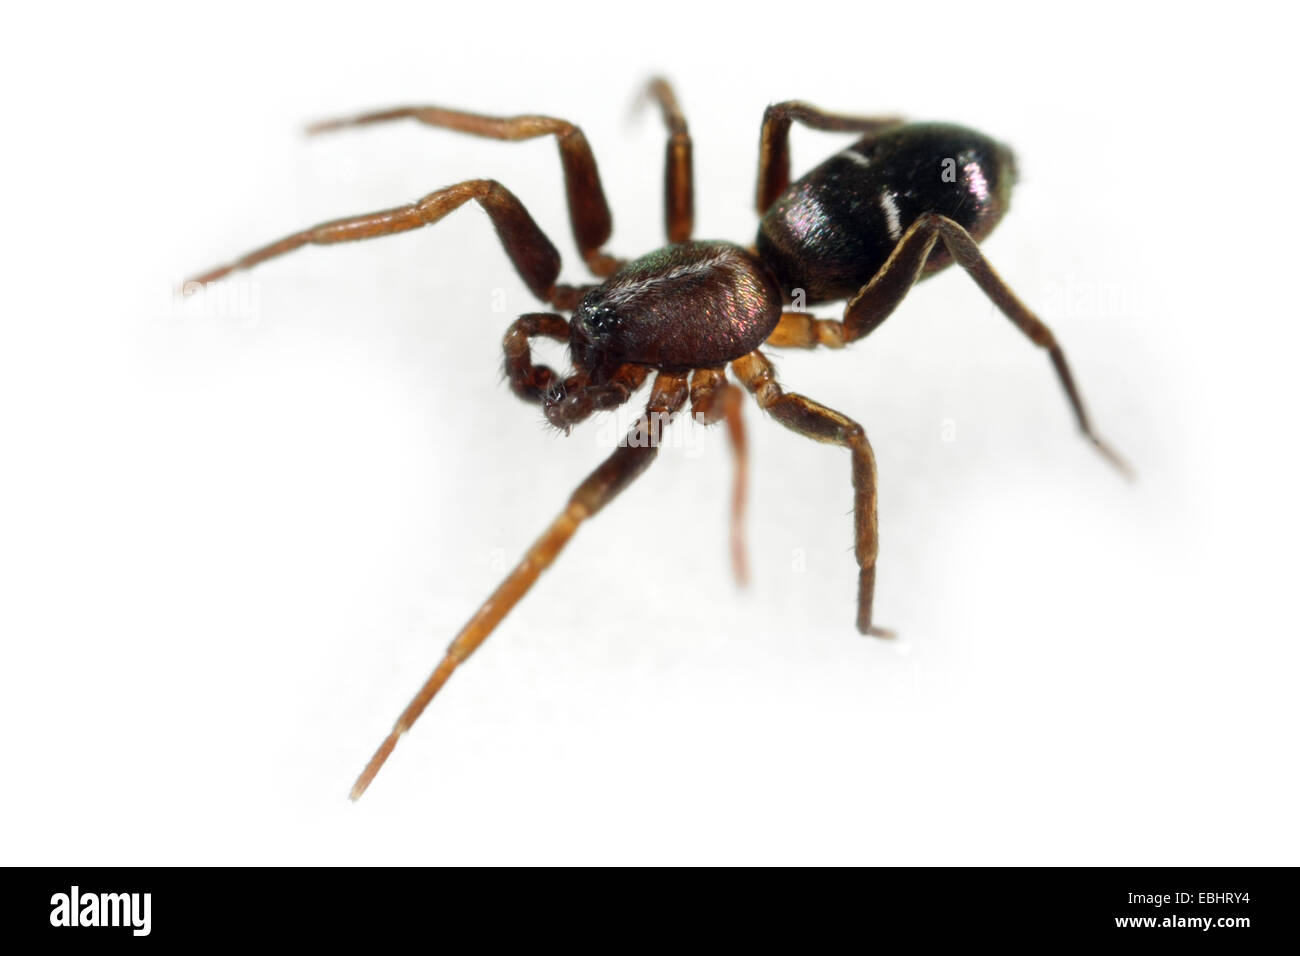 A male Pine-Tree Ant-Spider (Micaria subopaca) on a white background, part of the family Gnaphosidae - Stealthy Ground spiders. Stock Photo